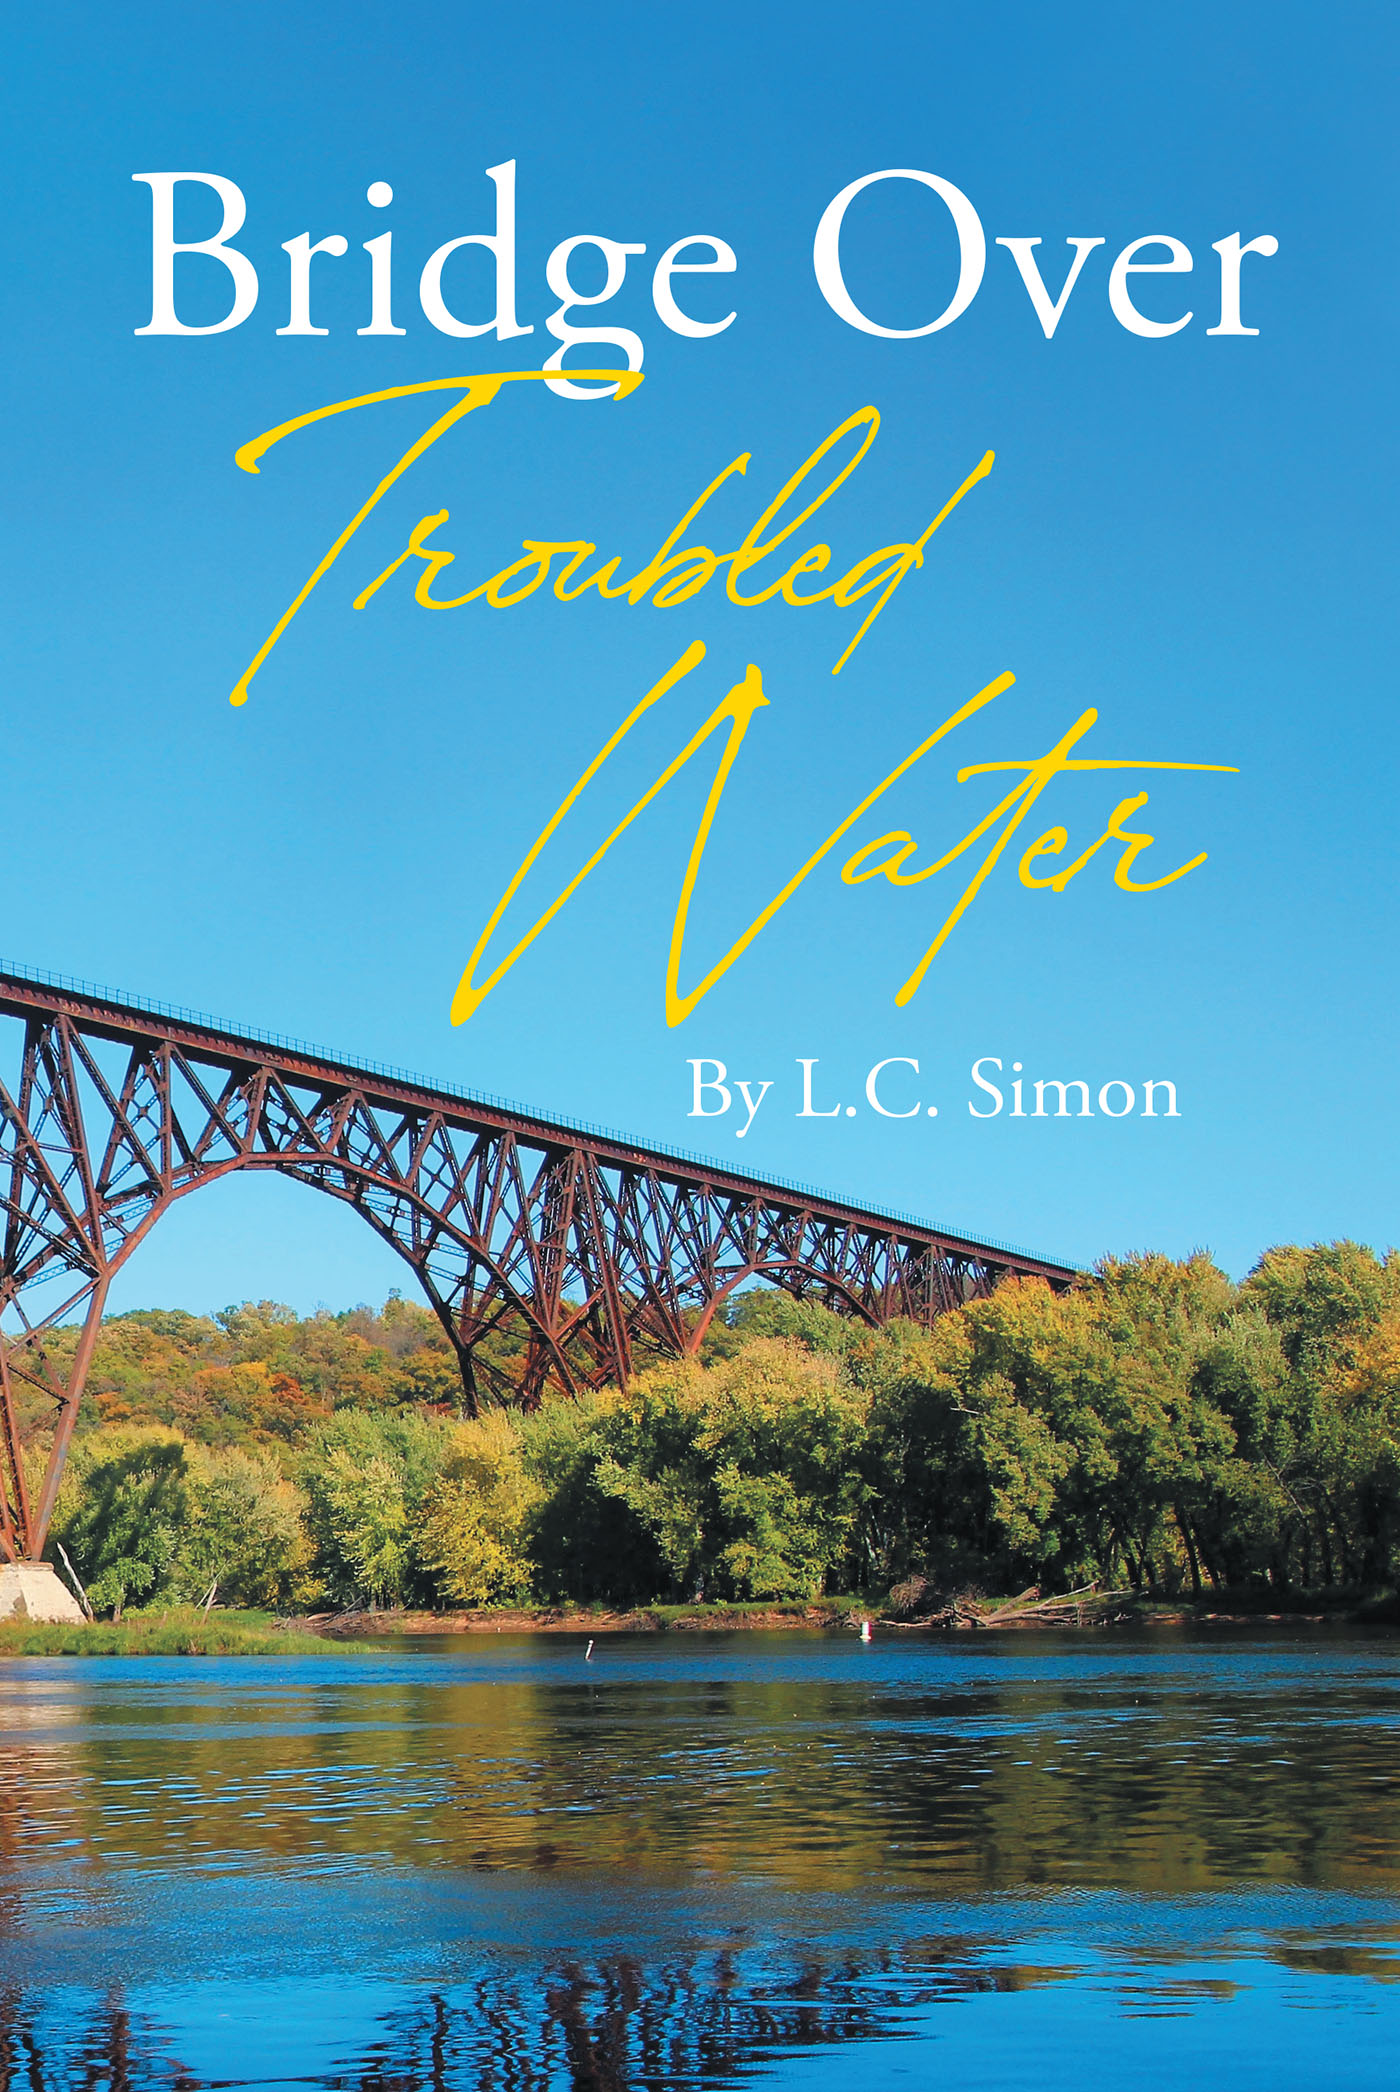 Author L.C. Simon’s New Book, “Bridge Over Troubled Water,” is the Powerful Story of a Retired Detective Who is Tormented by a Child Abuse Case He Can’t Forget